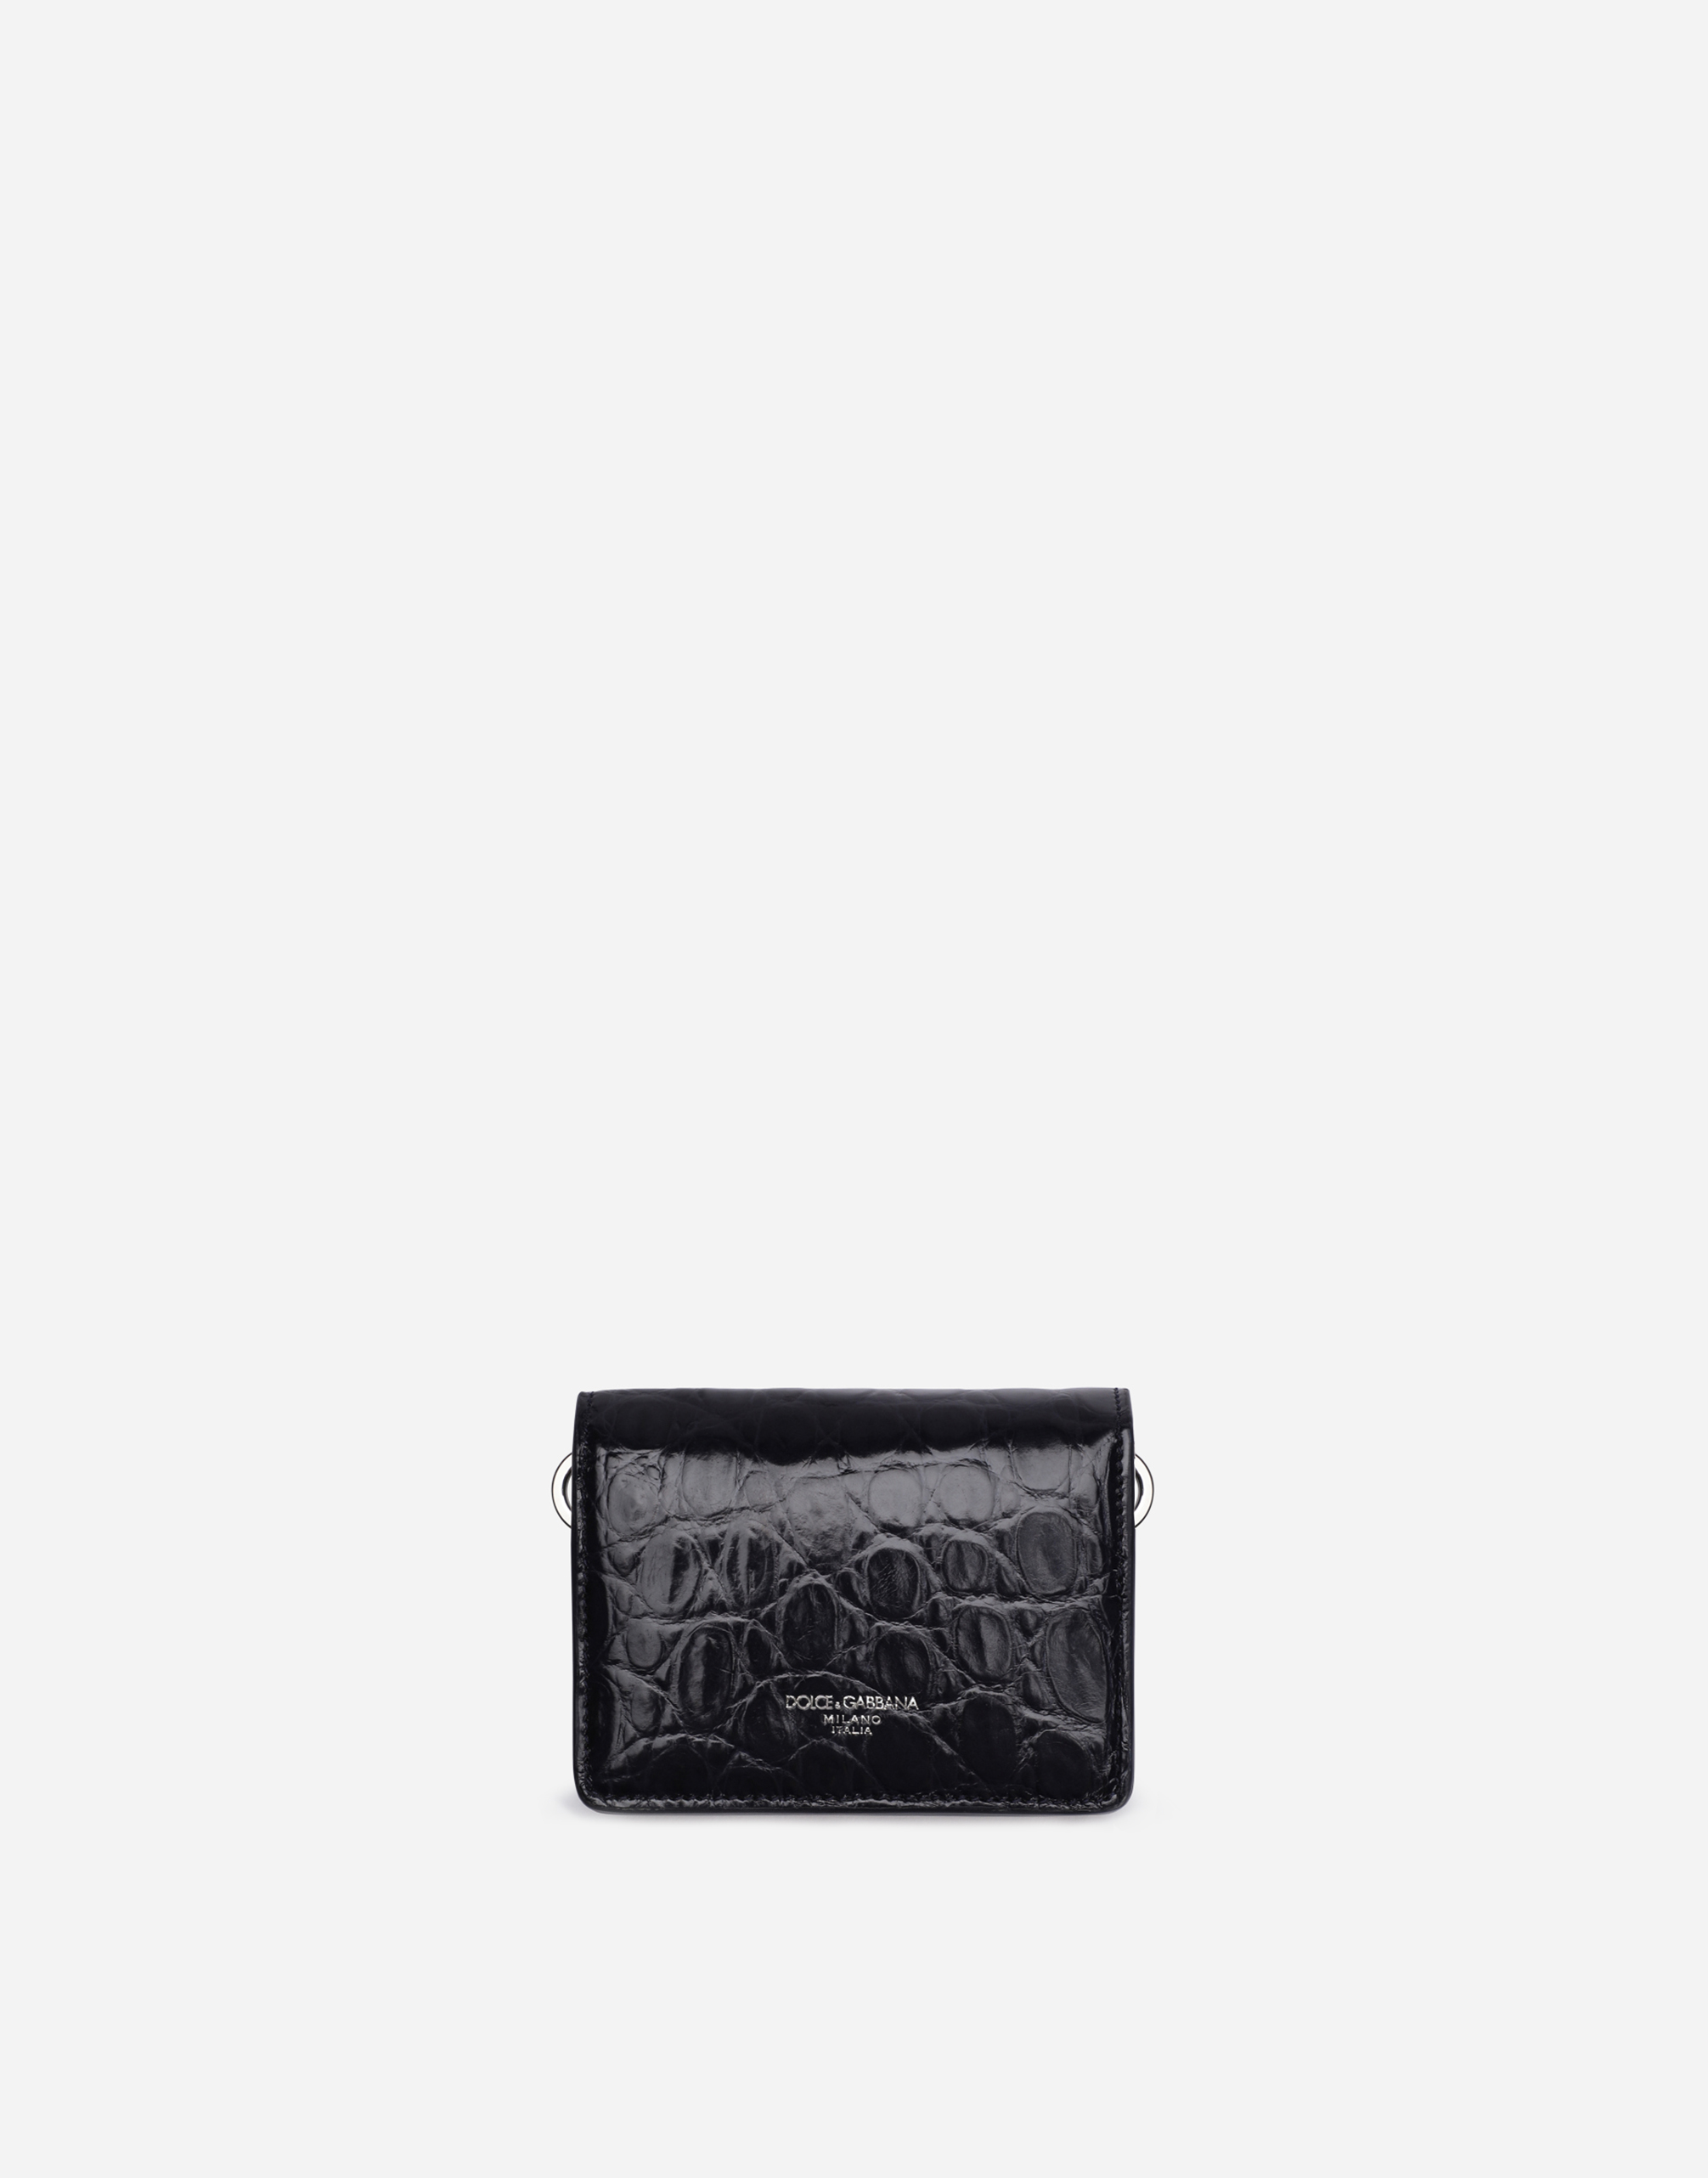 Shiny crocodile flank leather wallet with strap and heat-stamped logo in black